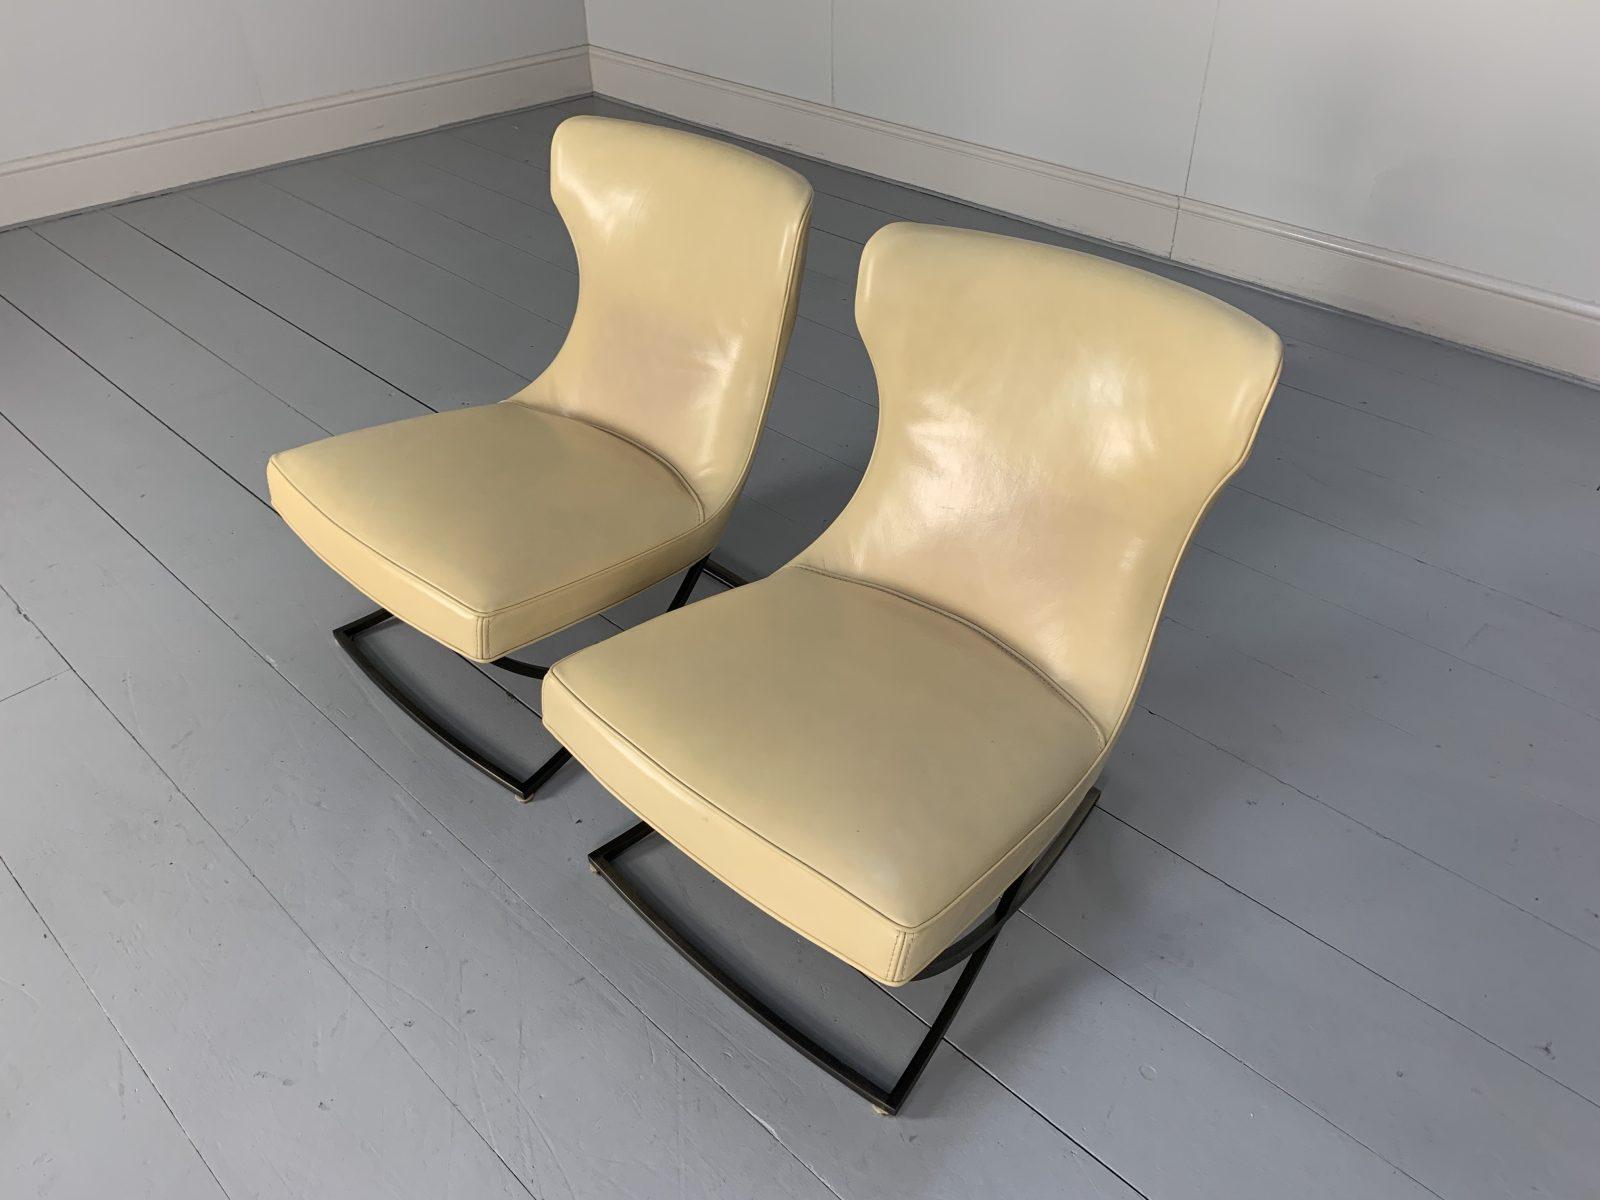 Pair of Baxter “Paloma” Chairs, in Cream Leather For Sale 1